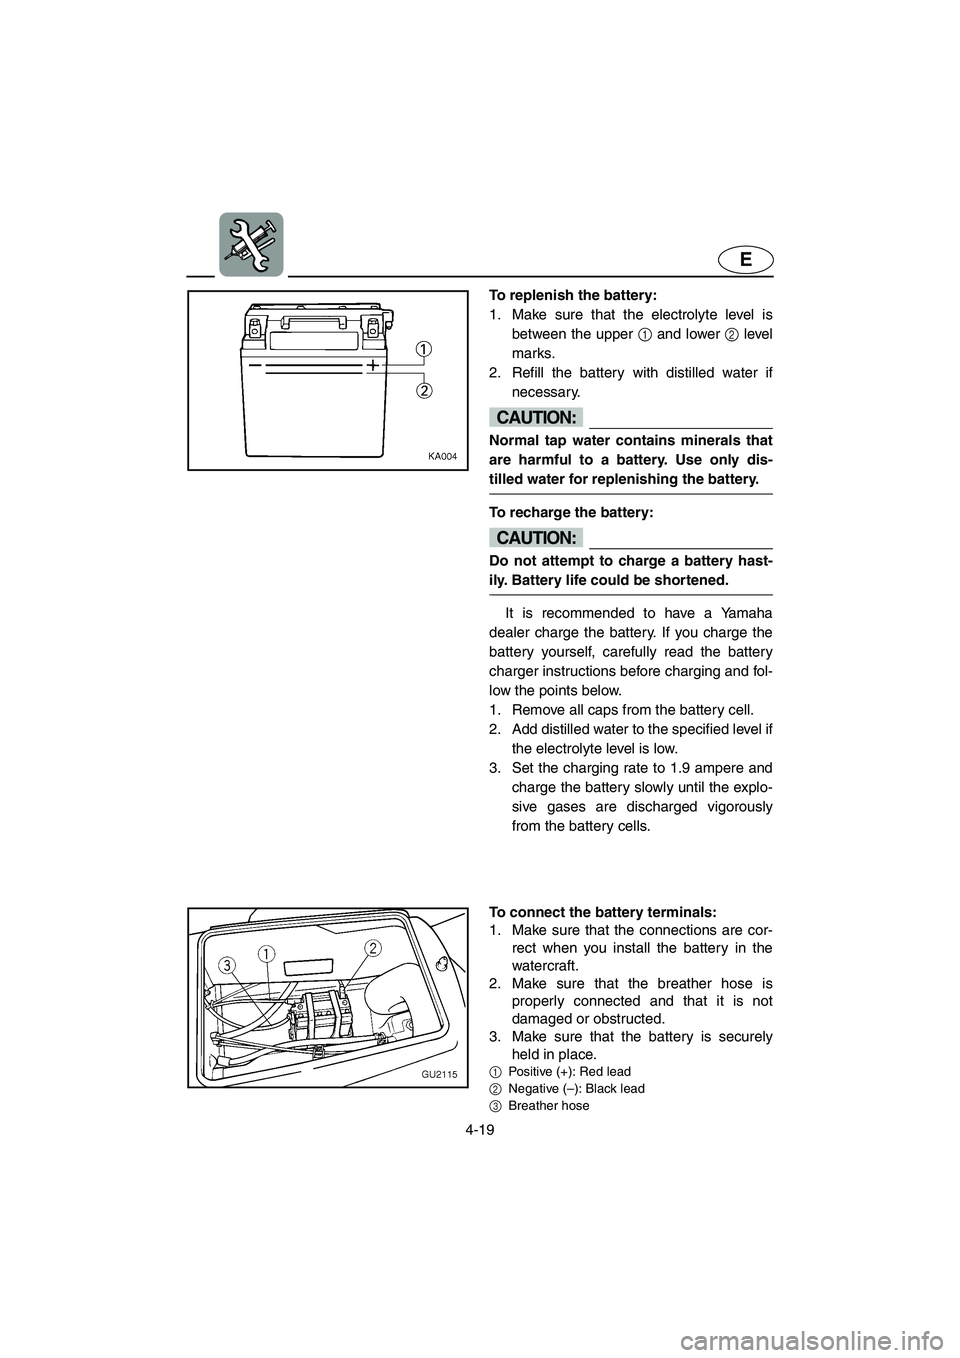 YAMAHA XL 700 2003  Owners Manual 4-19
E
To replenish the battery: 
1. Make sure that the electrolyte level is
between the upper 1 and lower 2 level
marks. 
2. Refill the battery with distilled water if
necessary.
CAUTION:@ Normal tap